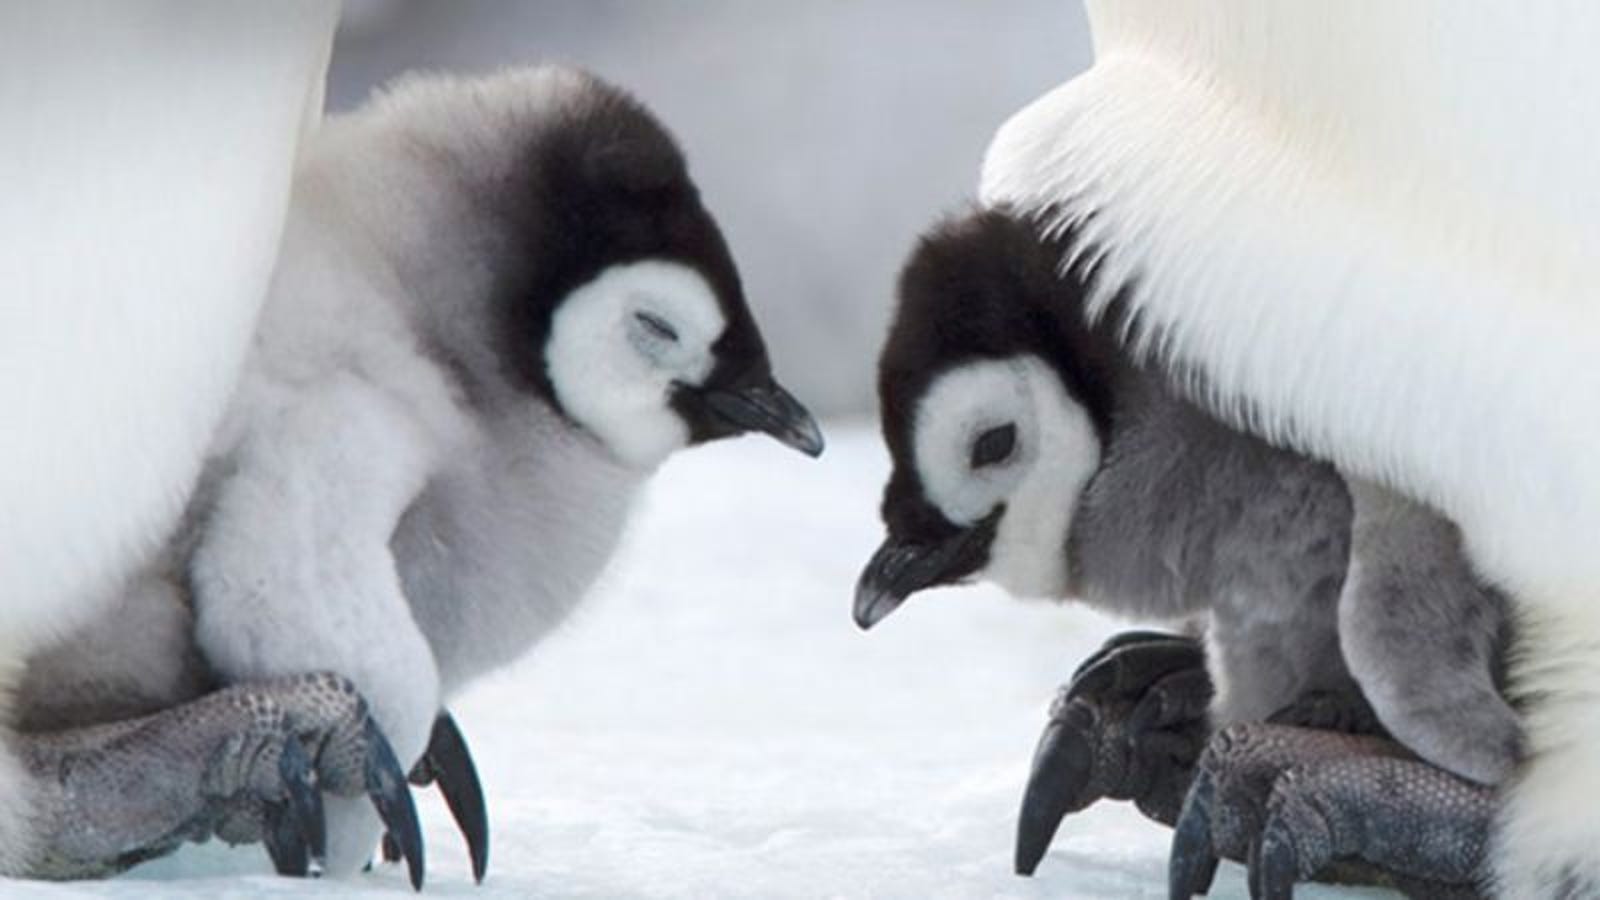 8 Baby Penguins That Are Pretty Cute But Don’t Stand A Chance Against